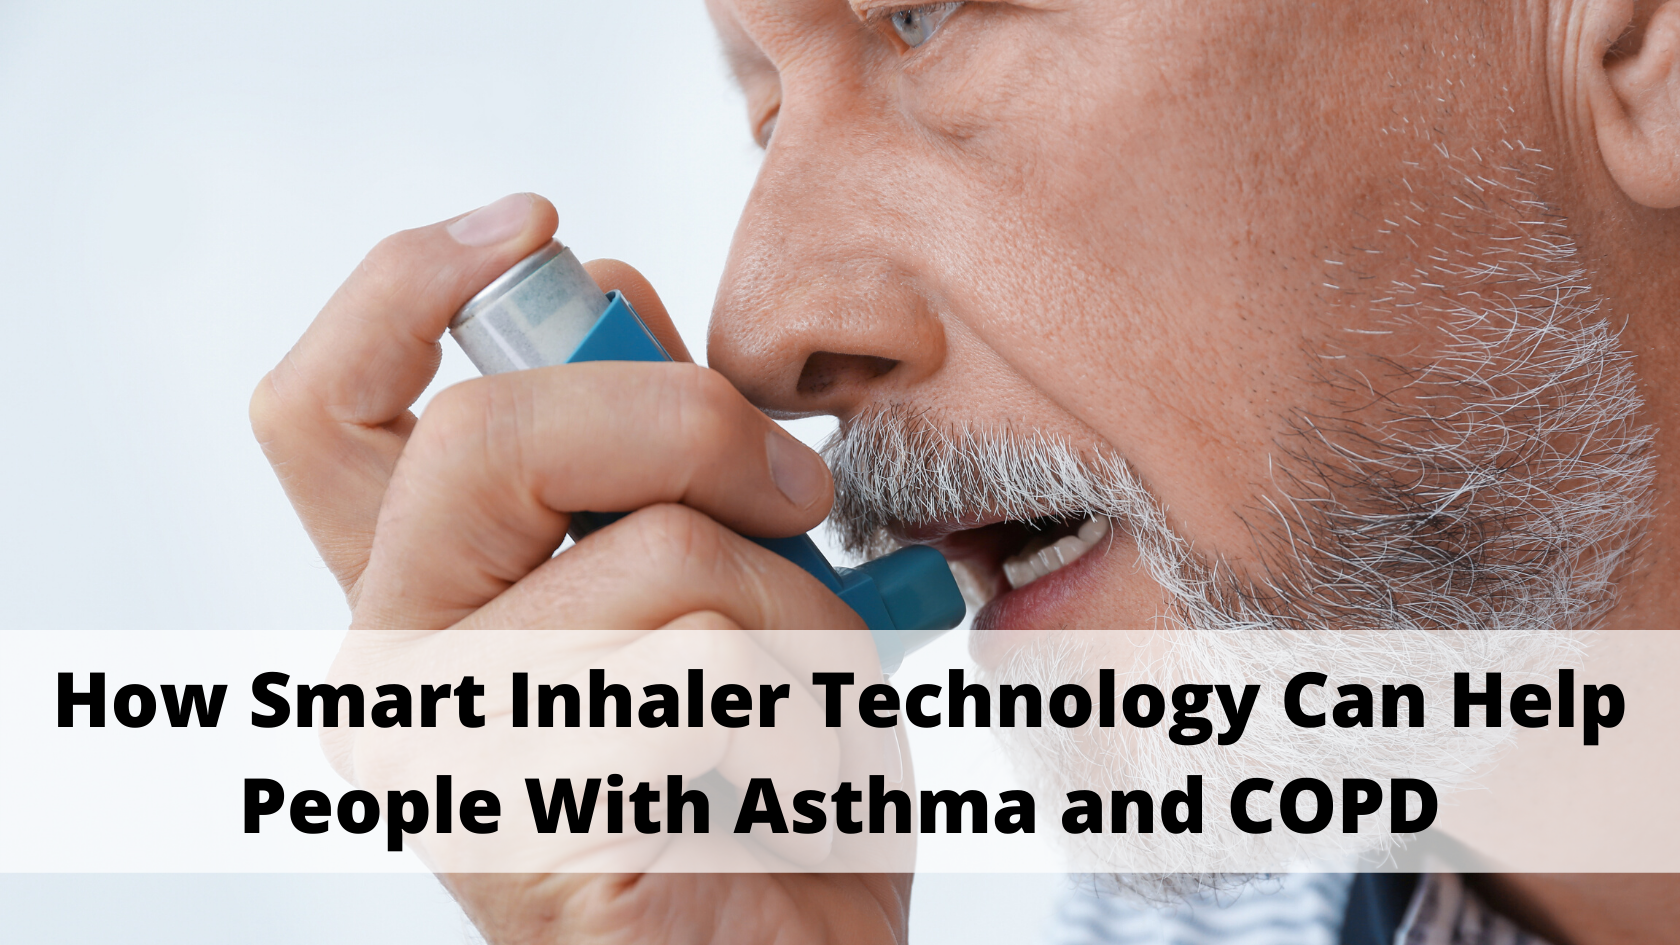 How Smart Inhaler Technology Can Help People With Asthma and COPD